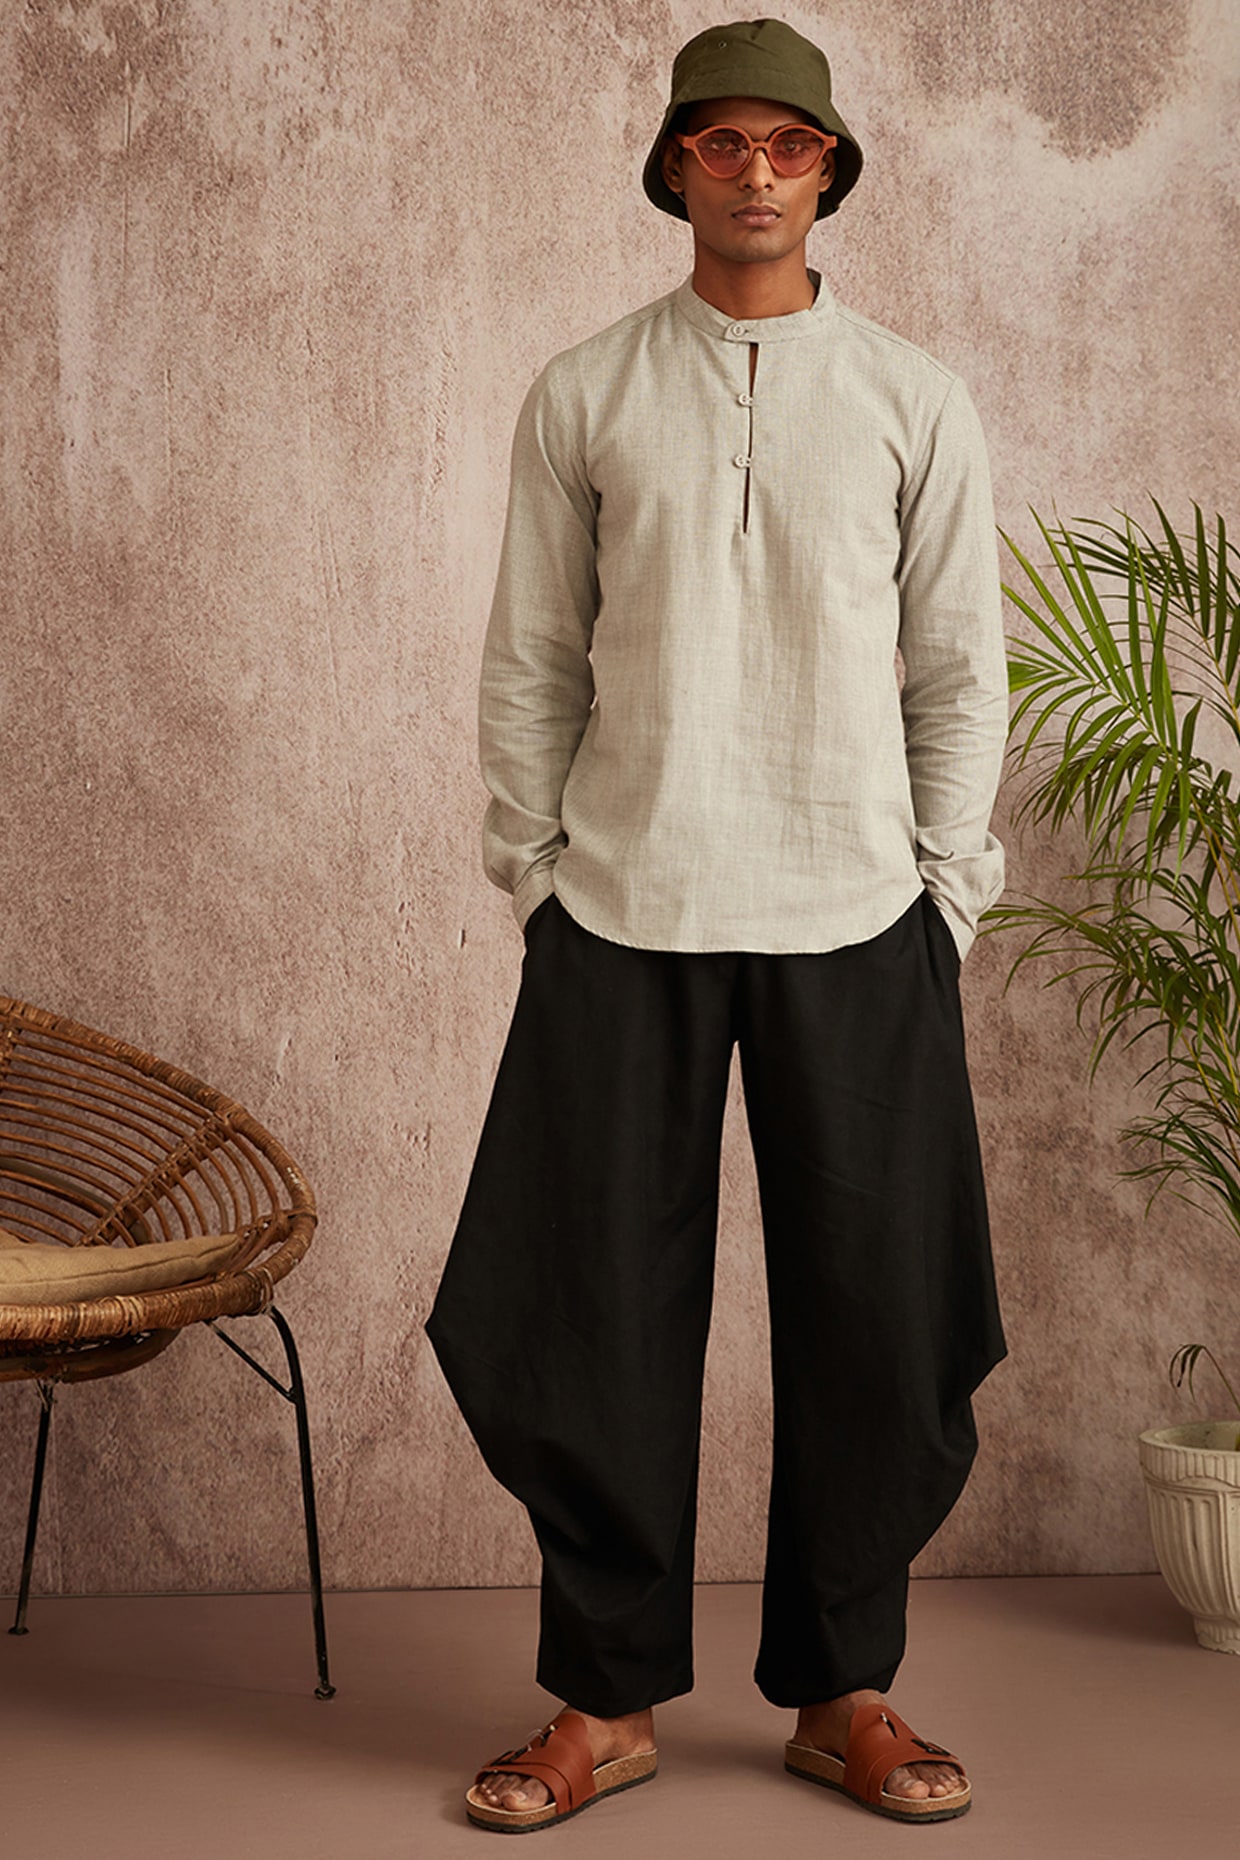 High Street Oversized Mens Formal Trousers Sale Pants With Elastic Waist  Hip Hop Black Harem Design, Korean Style Male Trousers Z0306 From Make07,  $25.27 | DHgate.Com